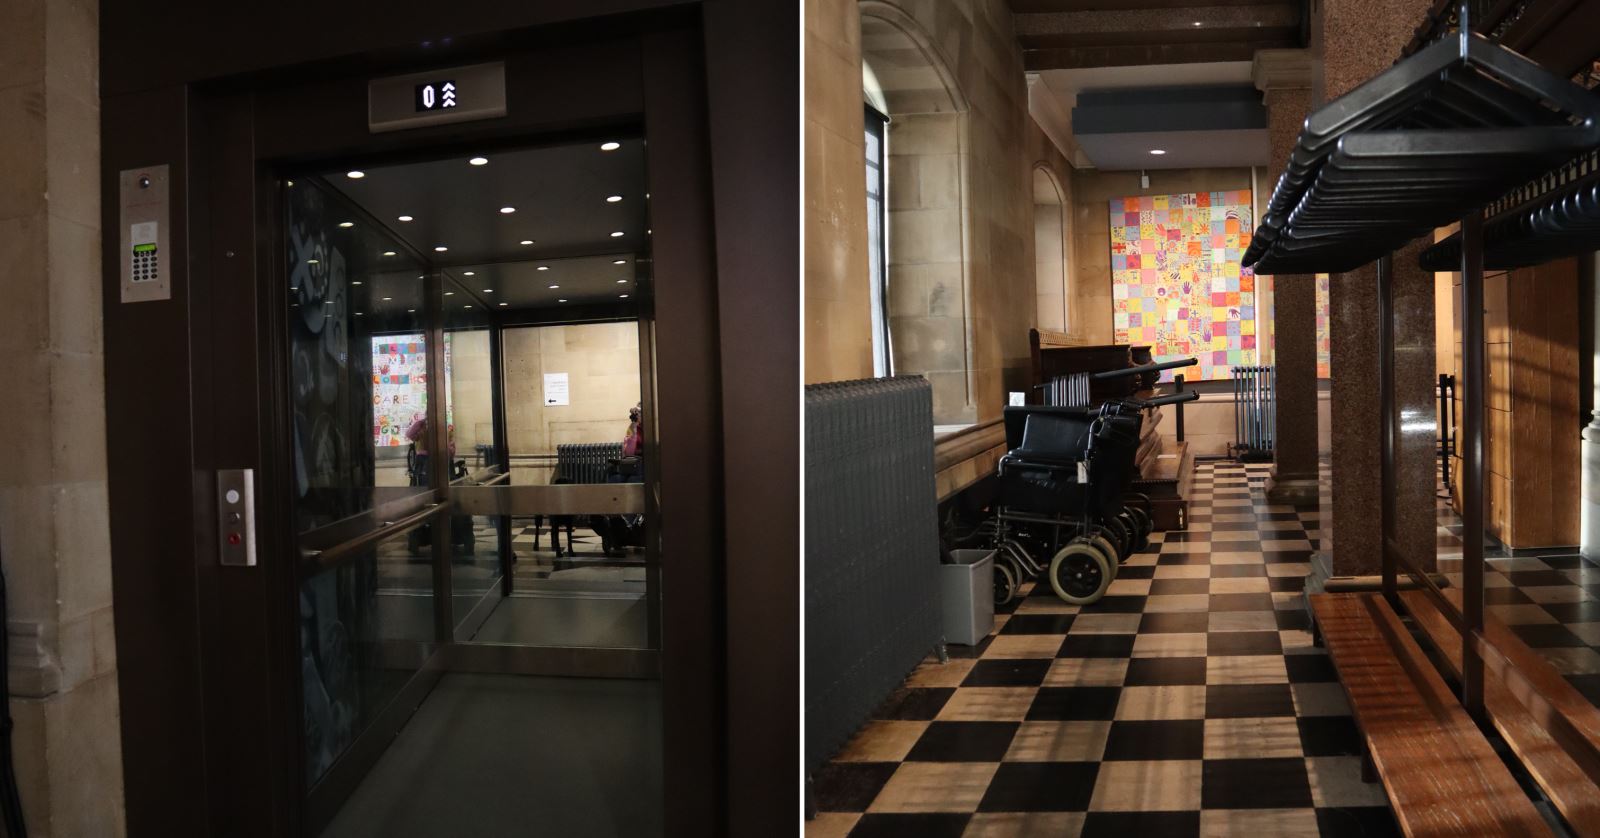 view of the lift inside The Bowes Museum and wheelchairs which are available to use